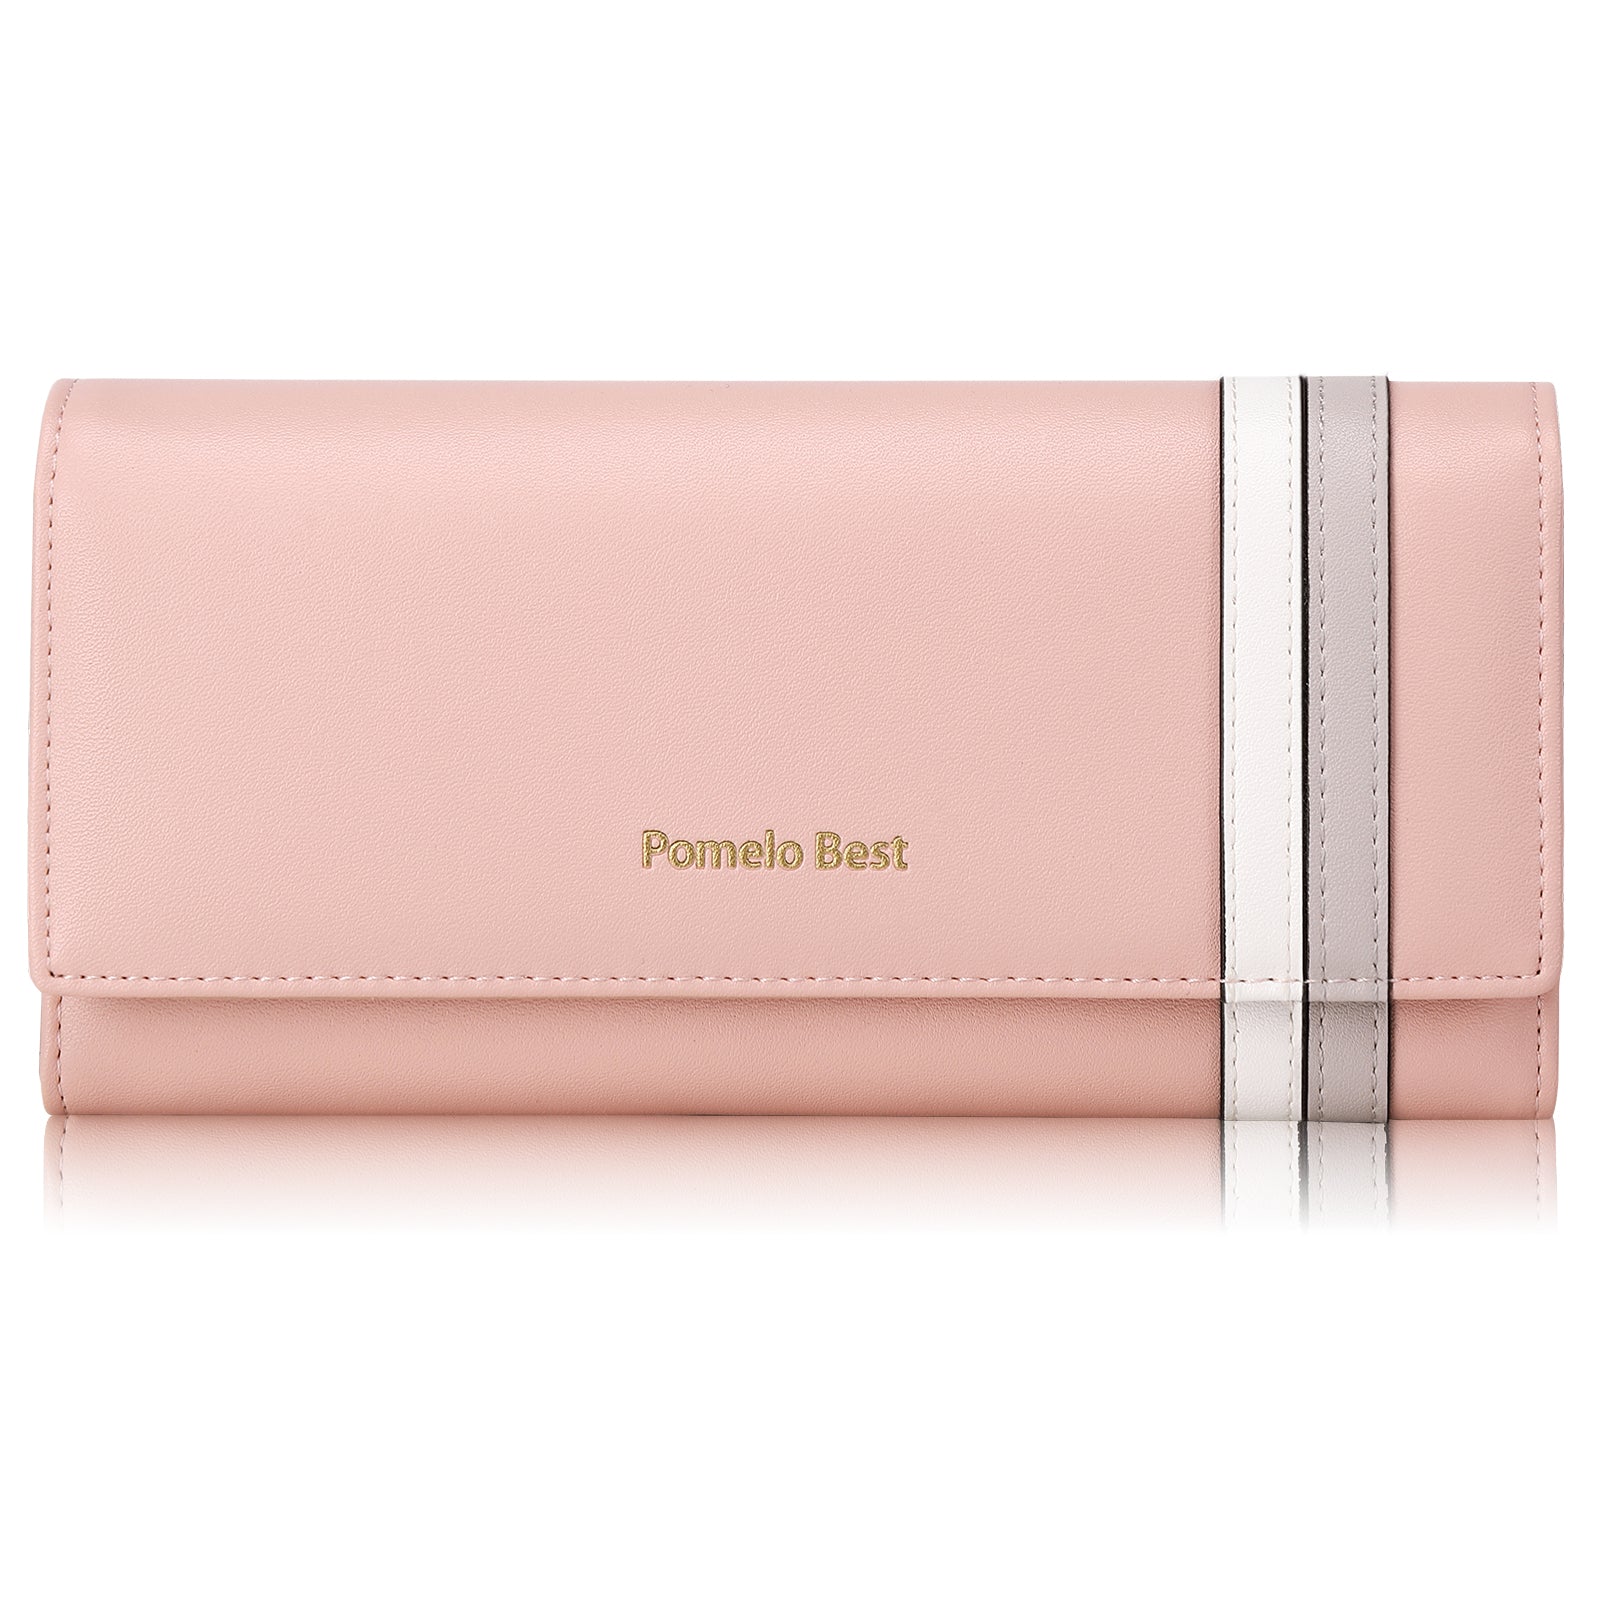 Pomelo Best Women's Wallet Large PU Leather RFID Blocking Purse for Women with Many Card Slots and Coin Pocket (Pink)